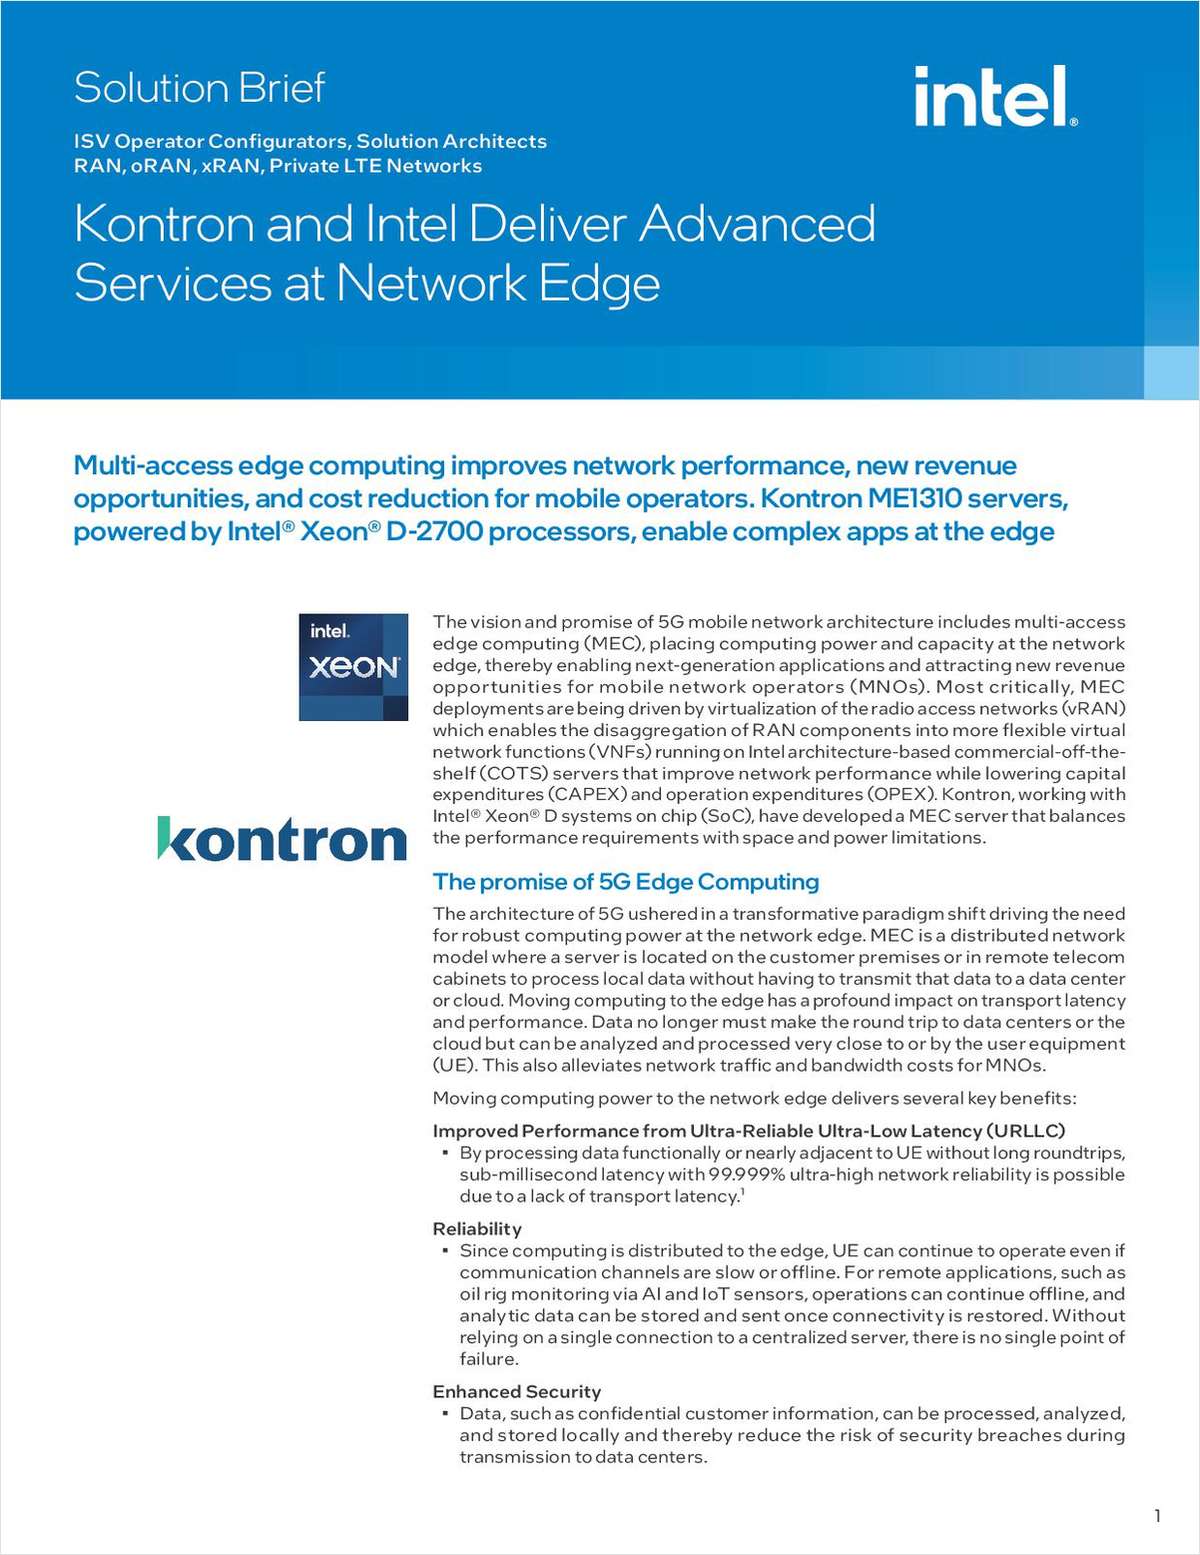 Kontron and Intel Deliver Advanced Solutions at Network Edge